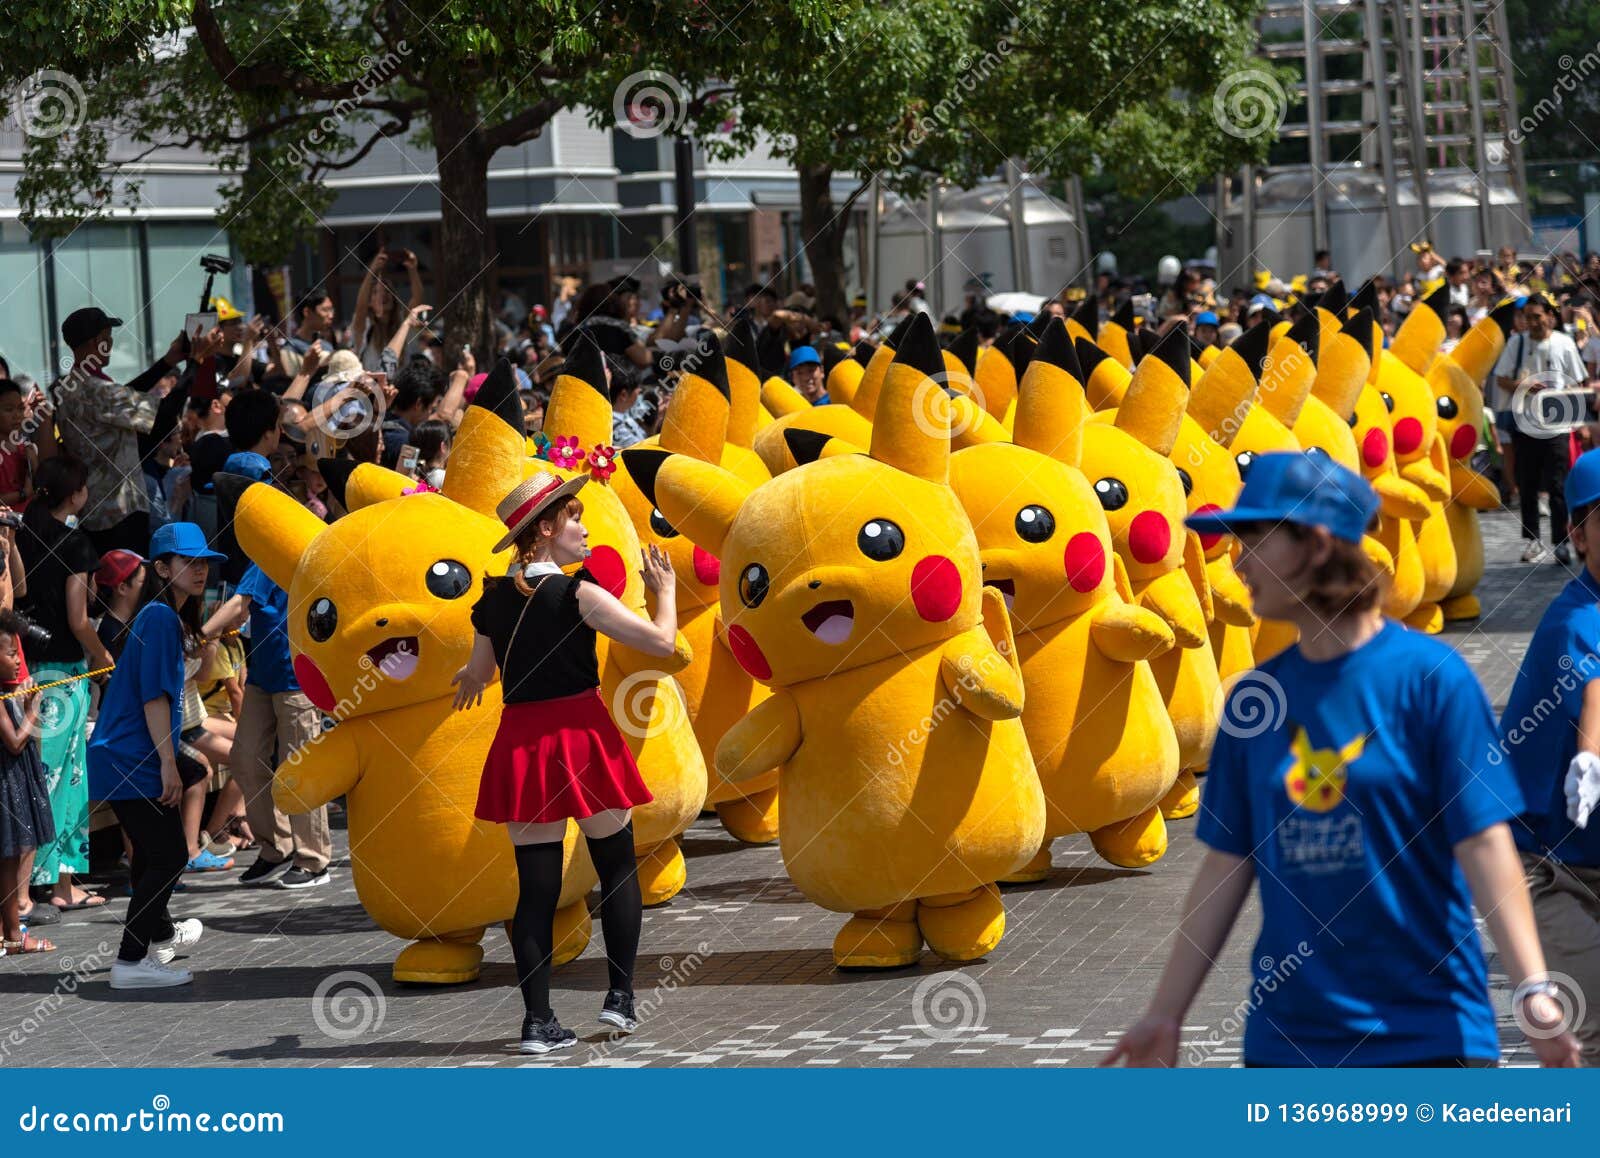 Pikachu Outbreak 18 Over 1 500 Pikachus To Appear Parade In Yokohama Editorial Stock Image Image Of Child Cultures